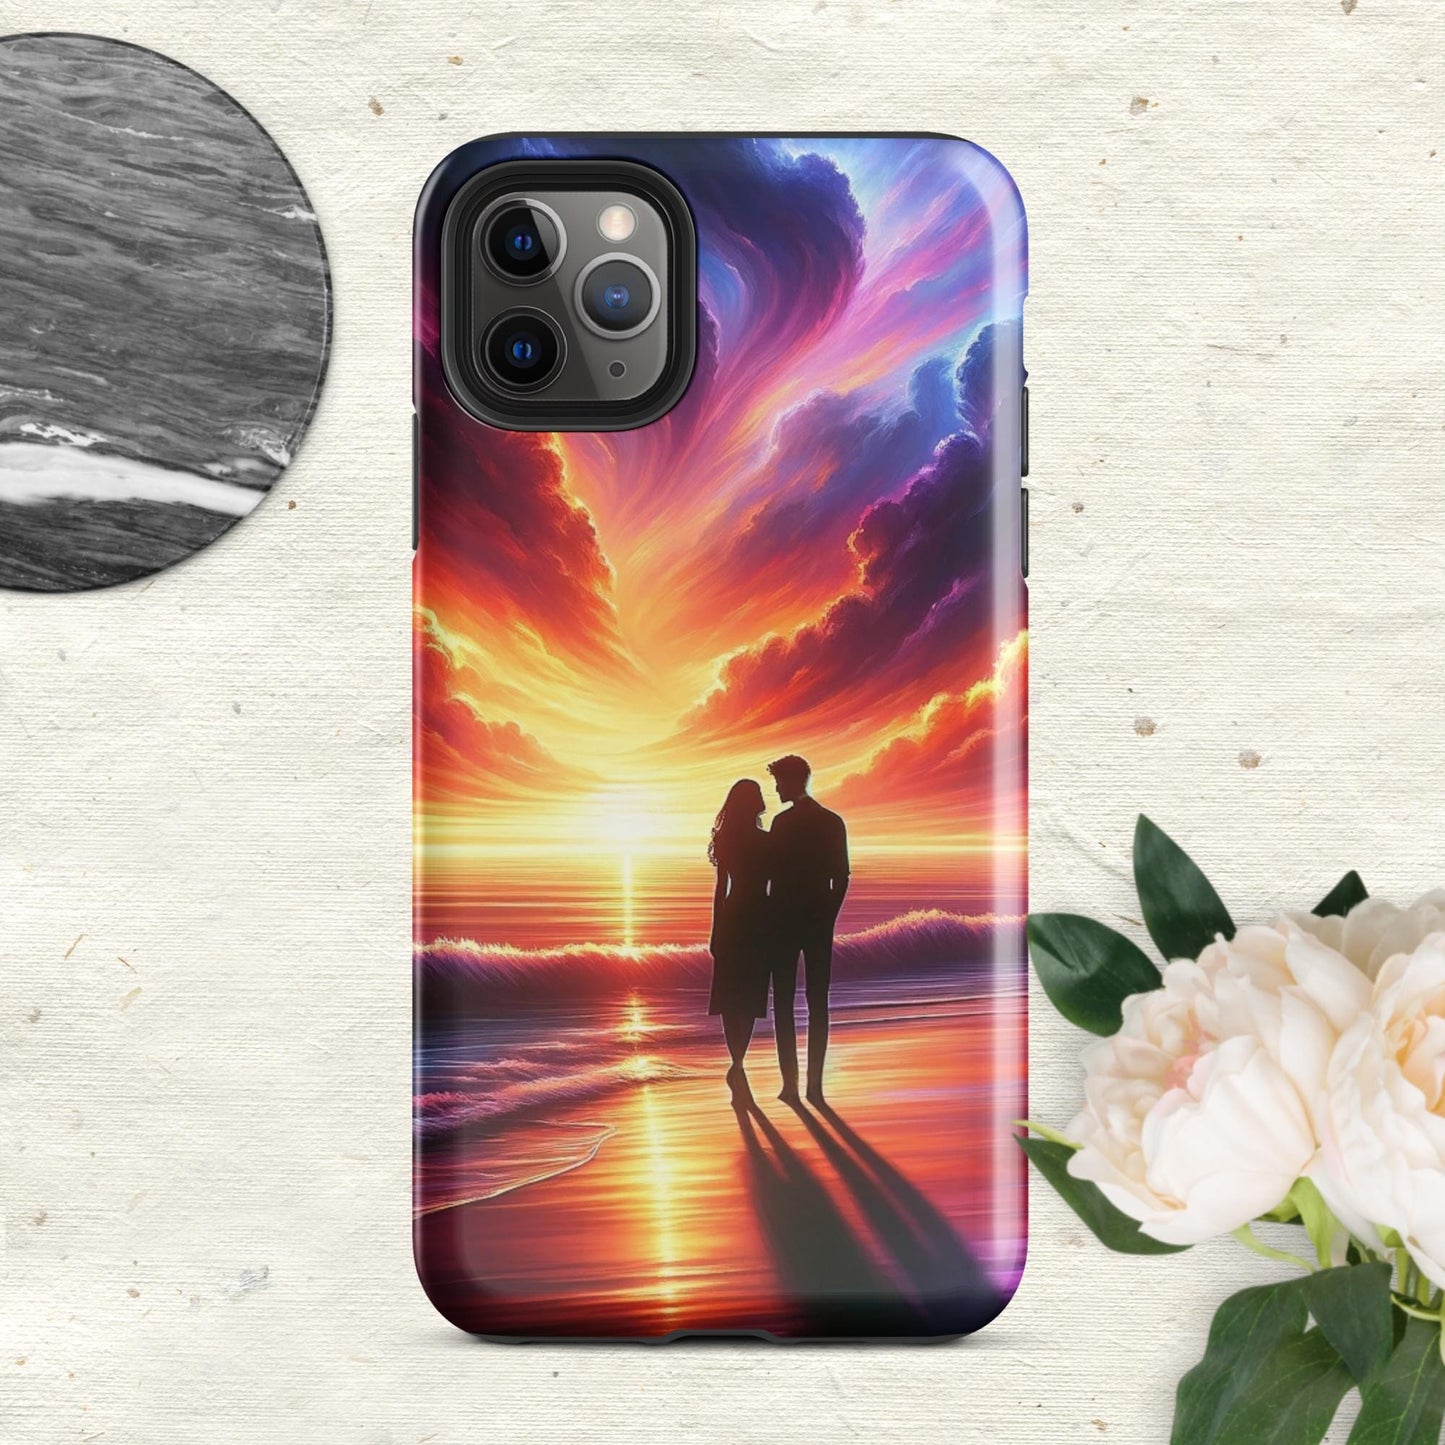 The Hologram Hook Up Glossy / iPhone 11 Pro Max Lovers Sunset Tough Case for iPhone®